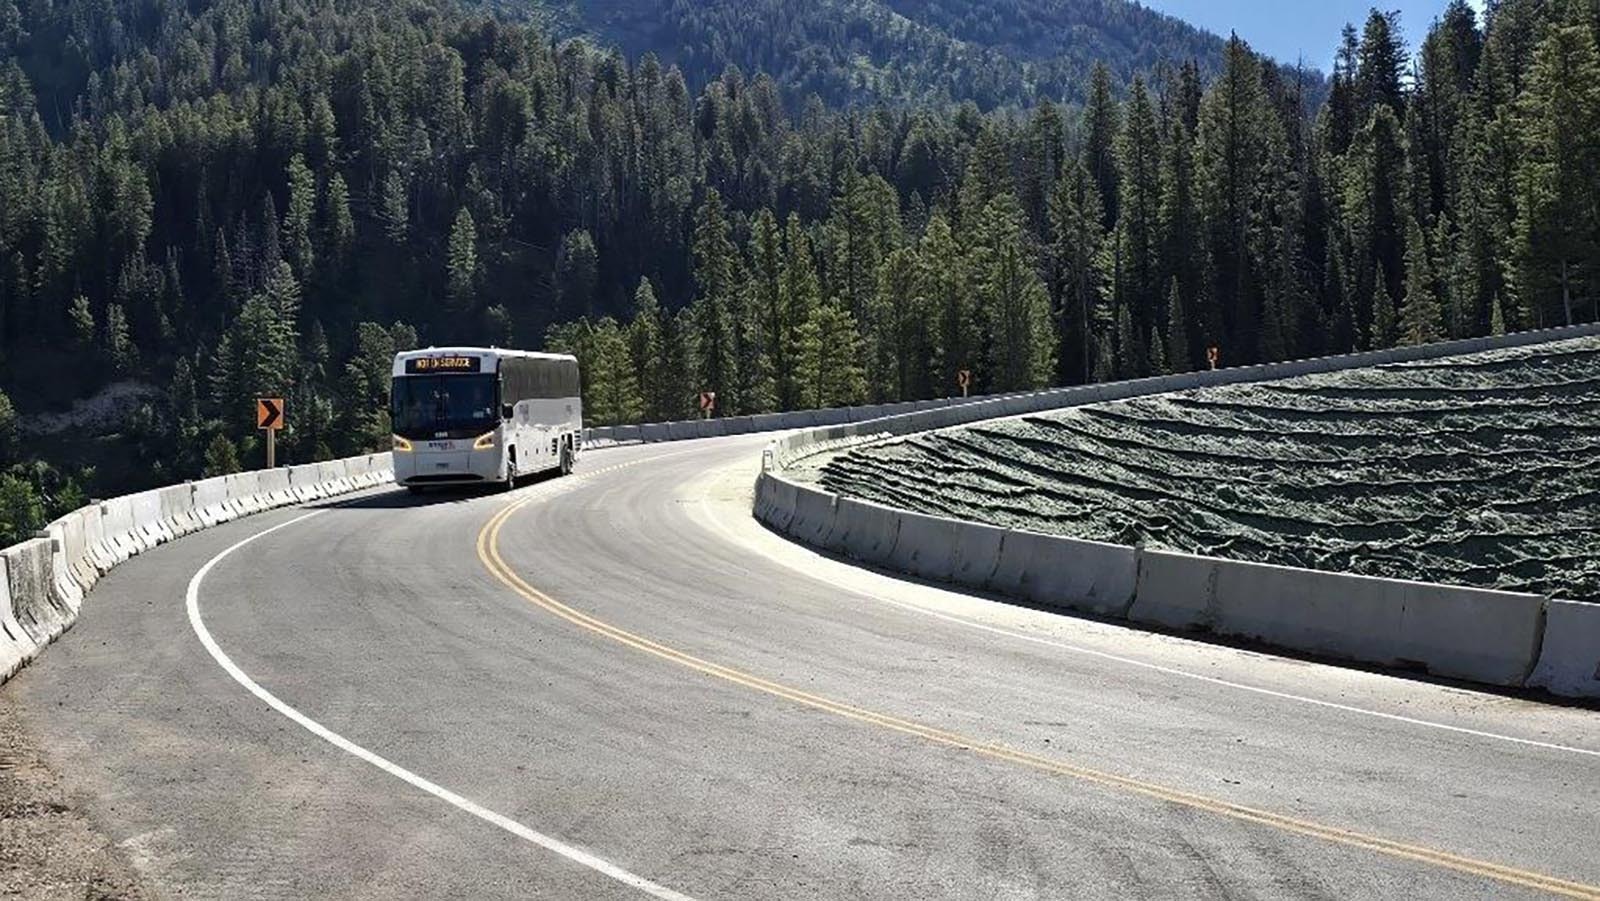 The first vehicle travels over a rebuilt temporary fix for the collapsed section of Teton Pass.